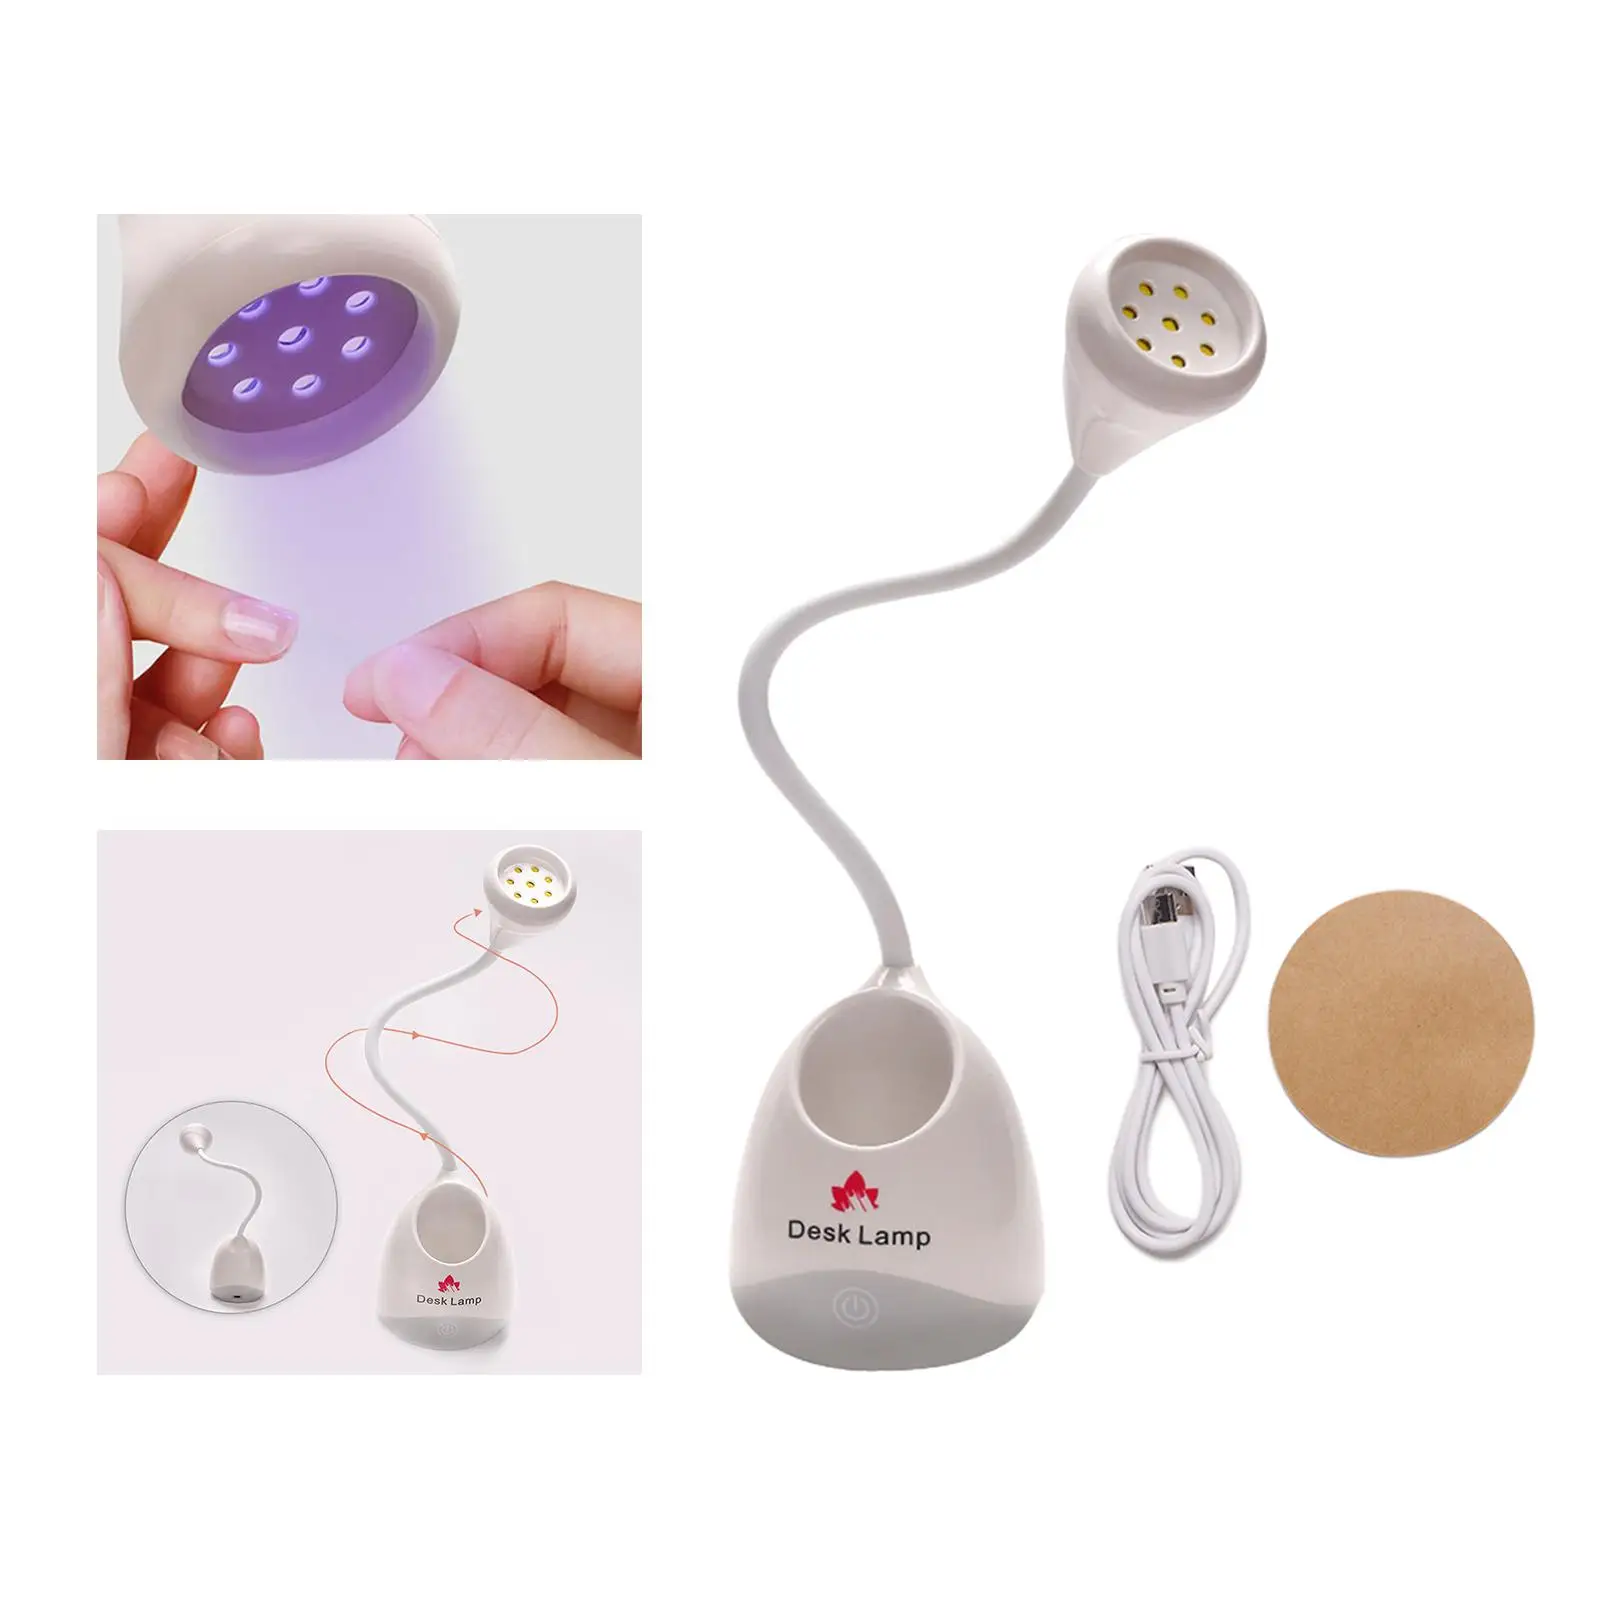 LED Nail Lamp Portable Rechargeable Cordless for Nail Polish for Home DIY